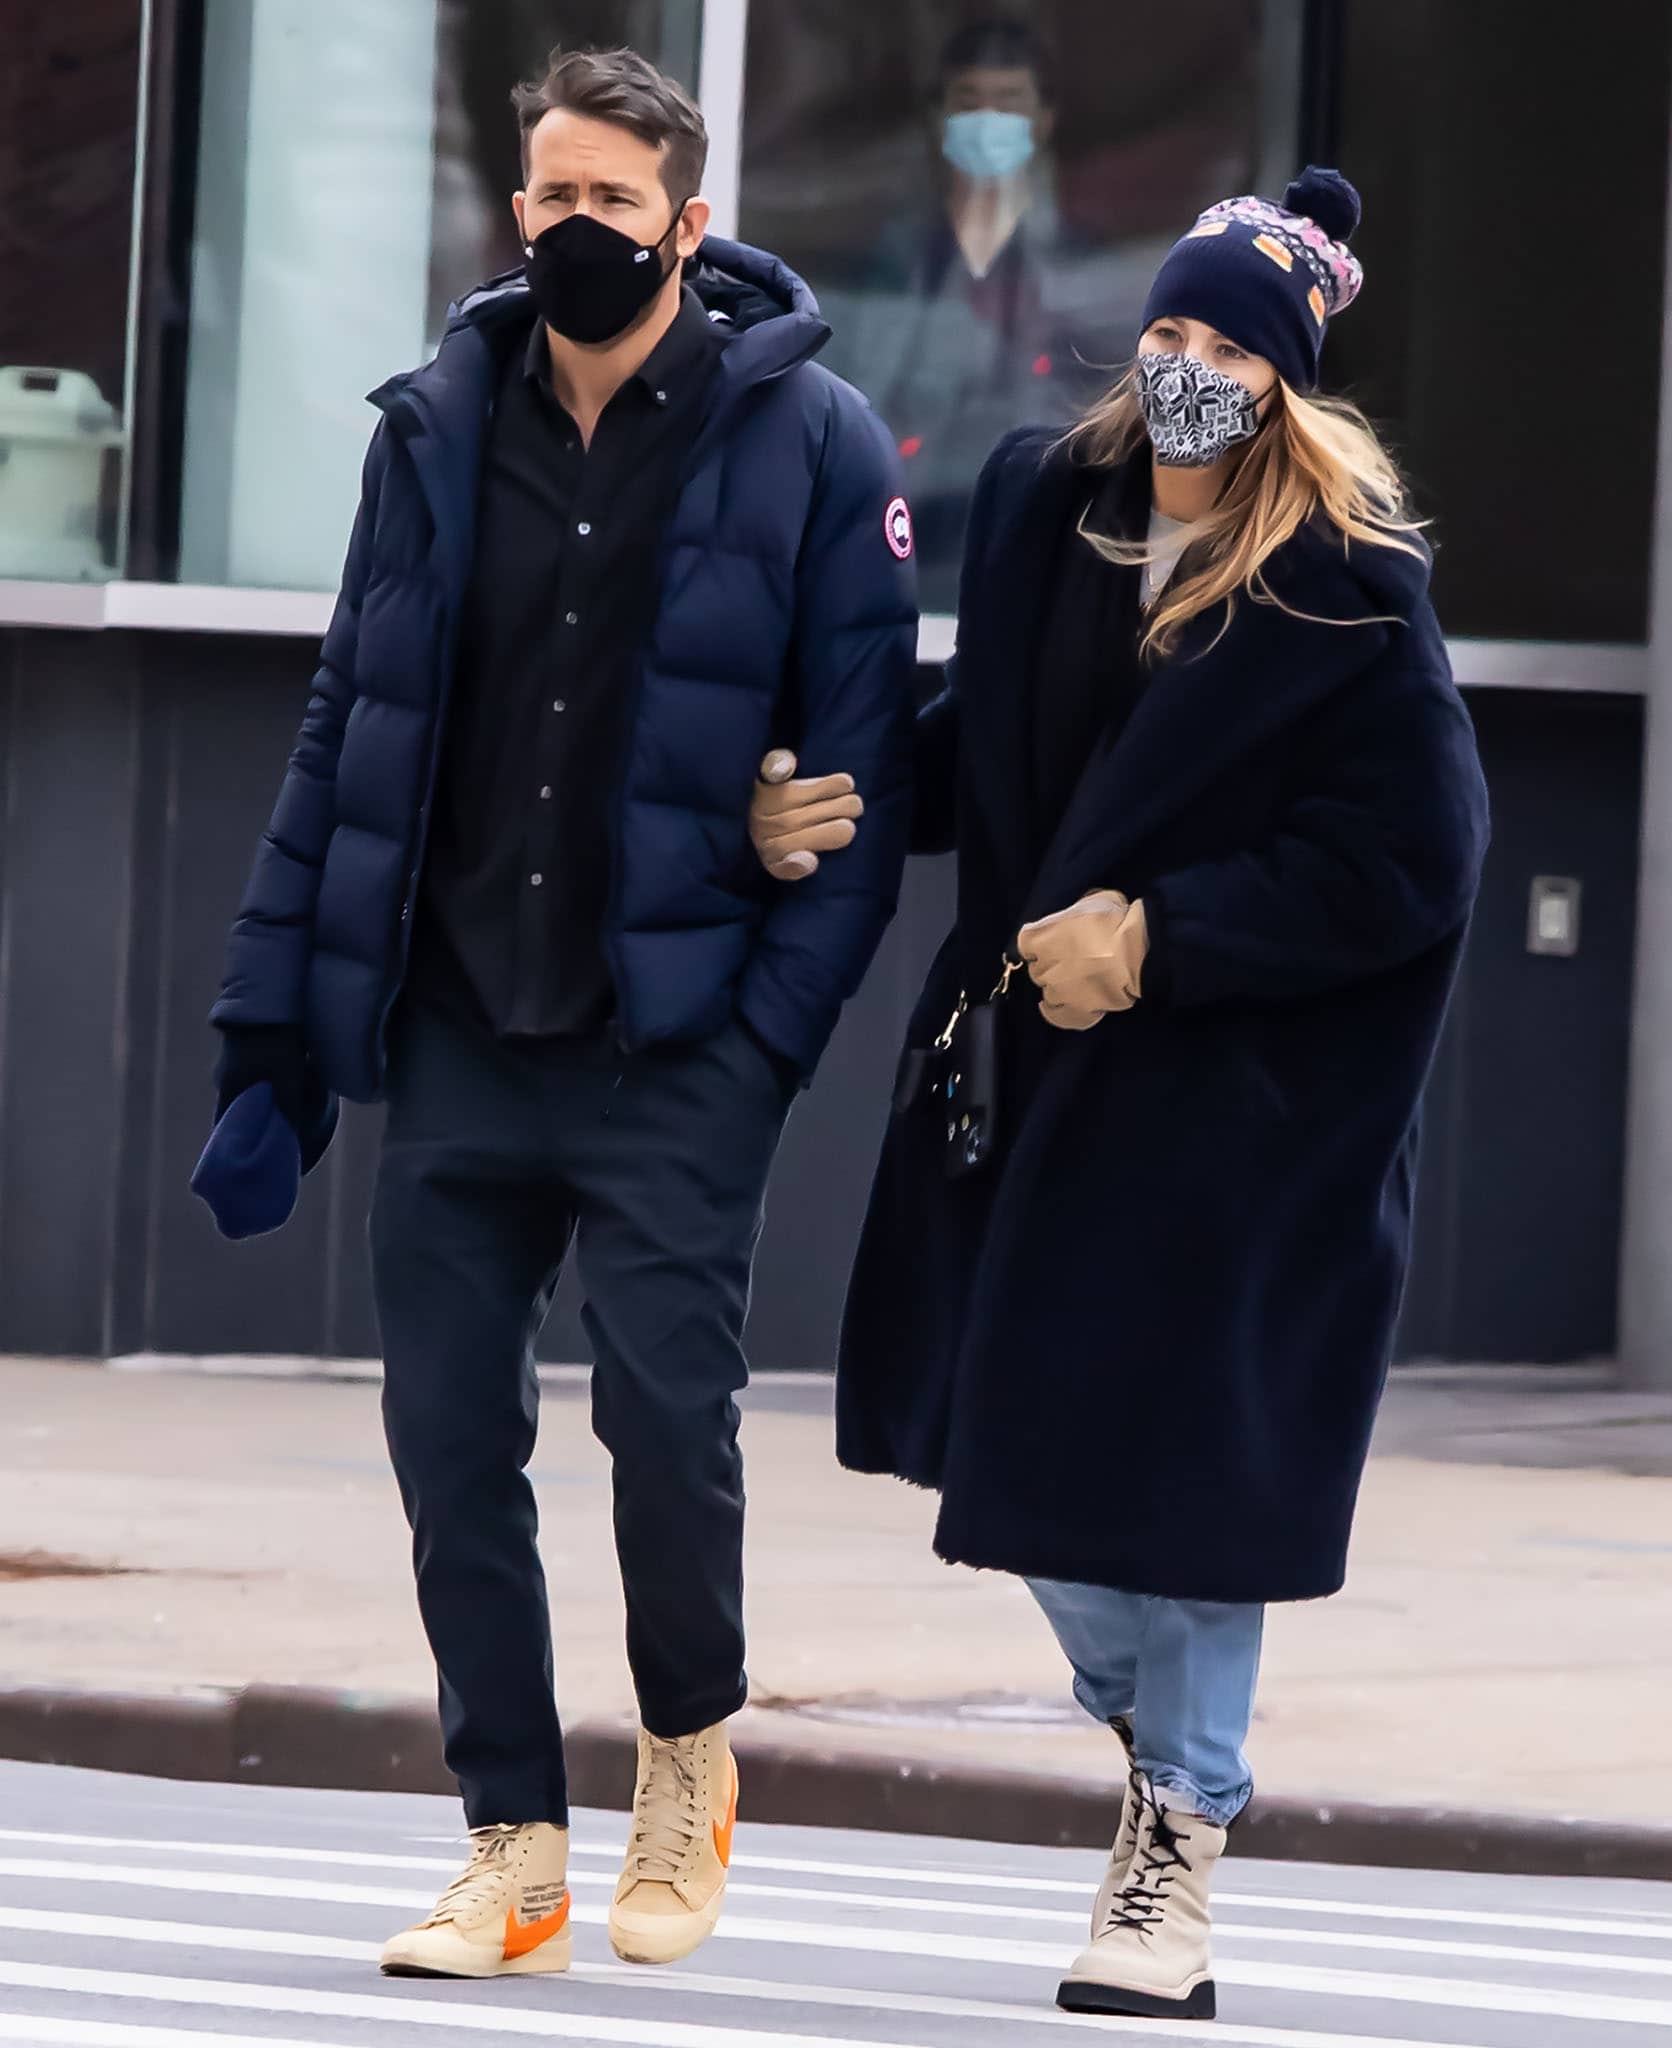 Ryan Reynolds and wife Blake Lively out and about in matching navy winter outfits in New York City on January 24, 2022